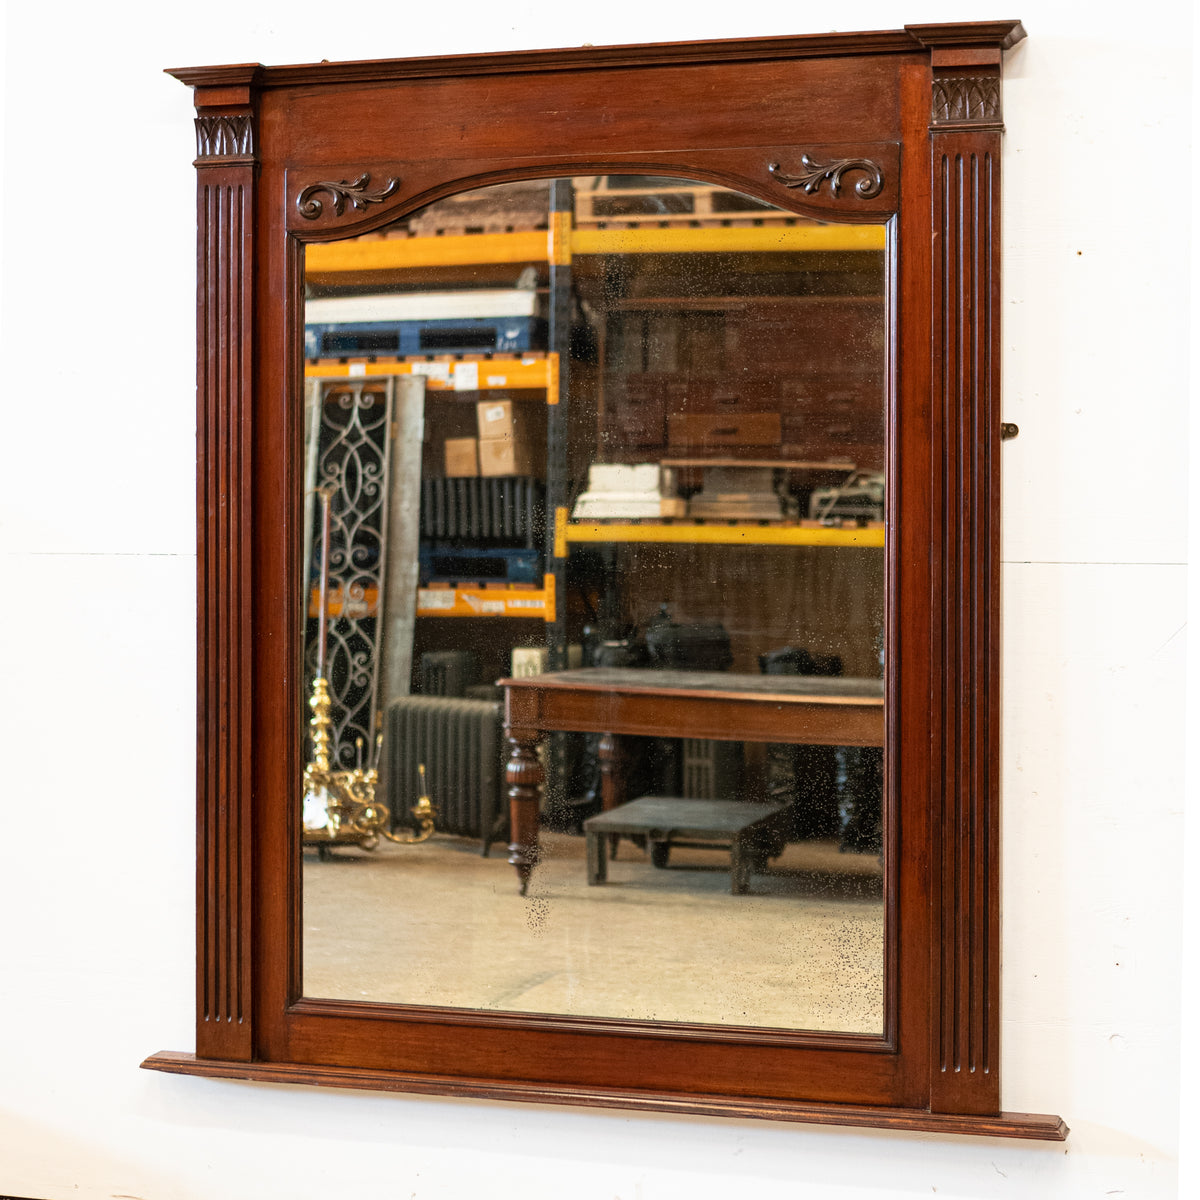 Large Antique Mahogany Overmantle Mirror | The Architectural Forum